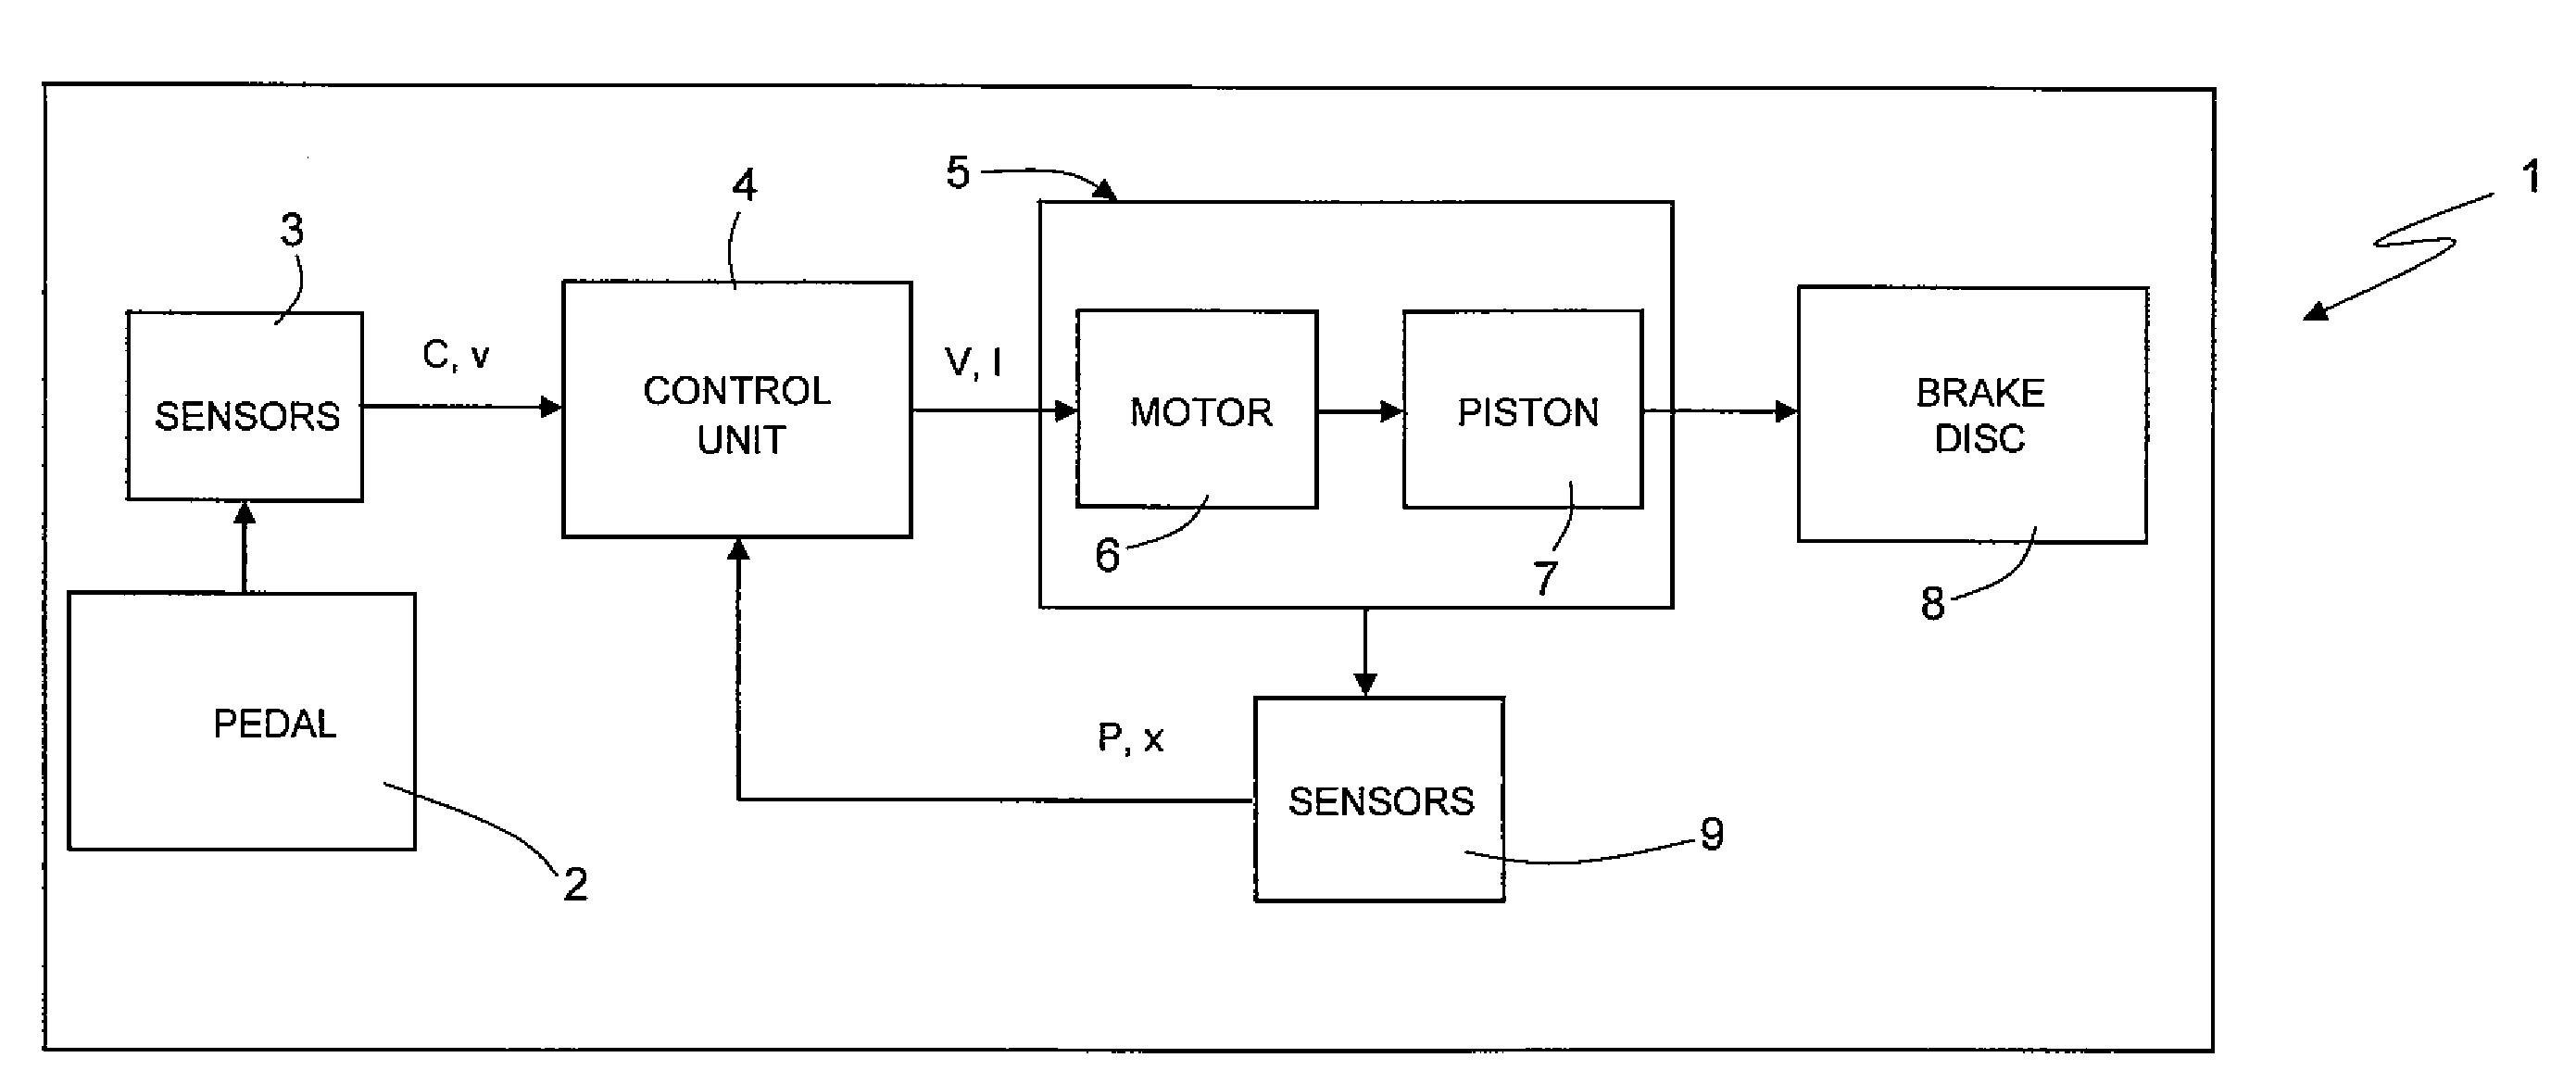 Integrated pressure sensor with double measuring scale and a high full-scale value